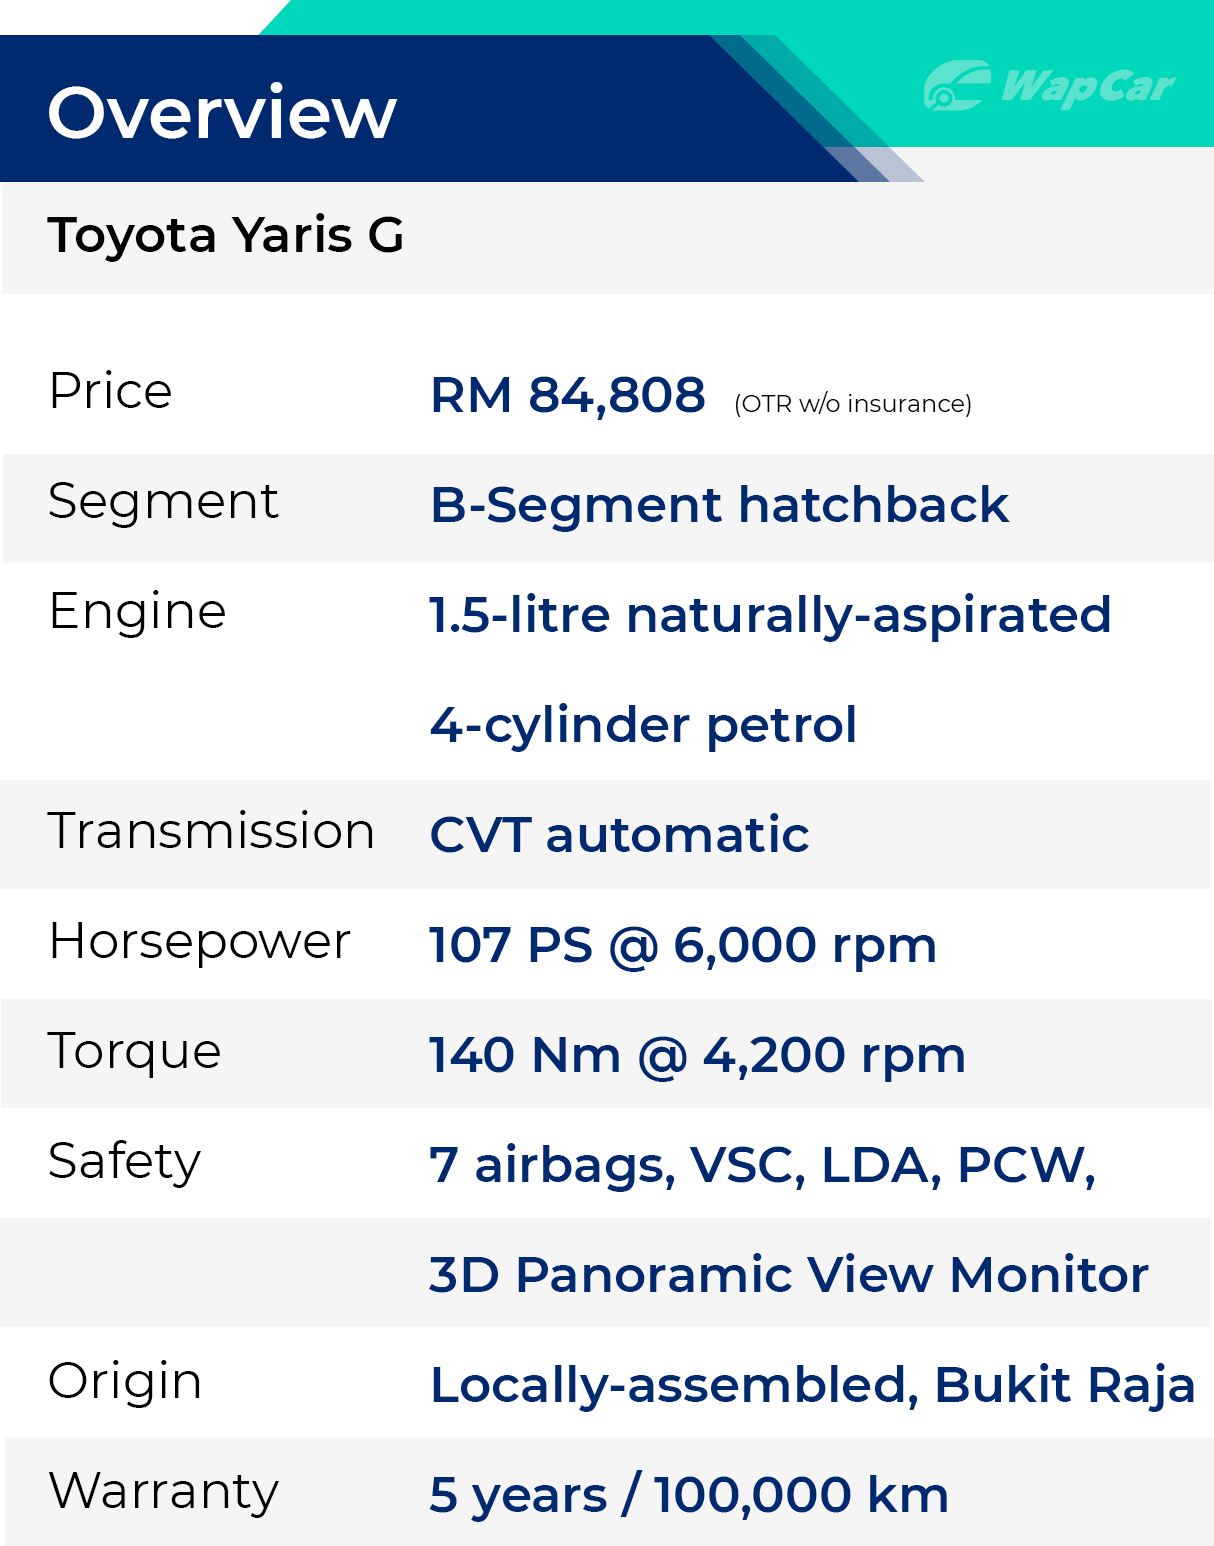 Want a drama-free but fun car that you can just get in and drive? Toyota Yaris is your ideal starter car